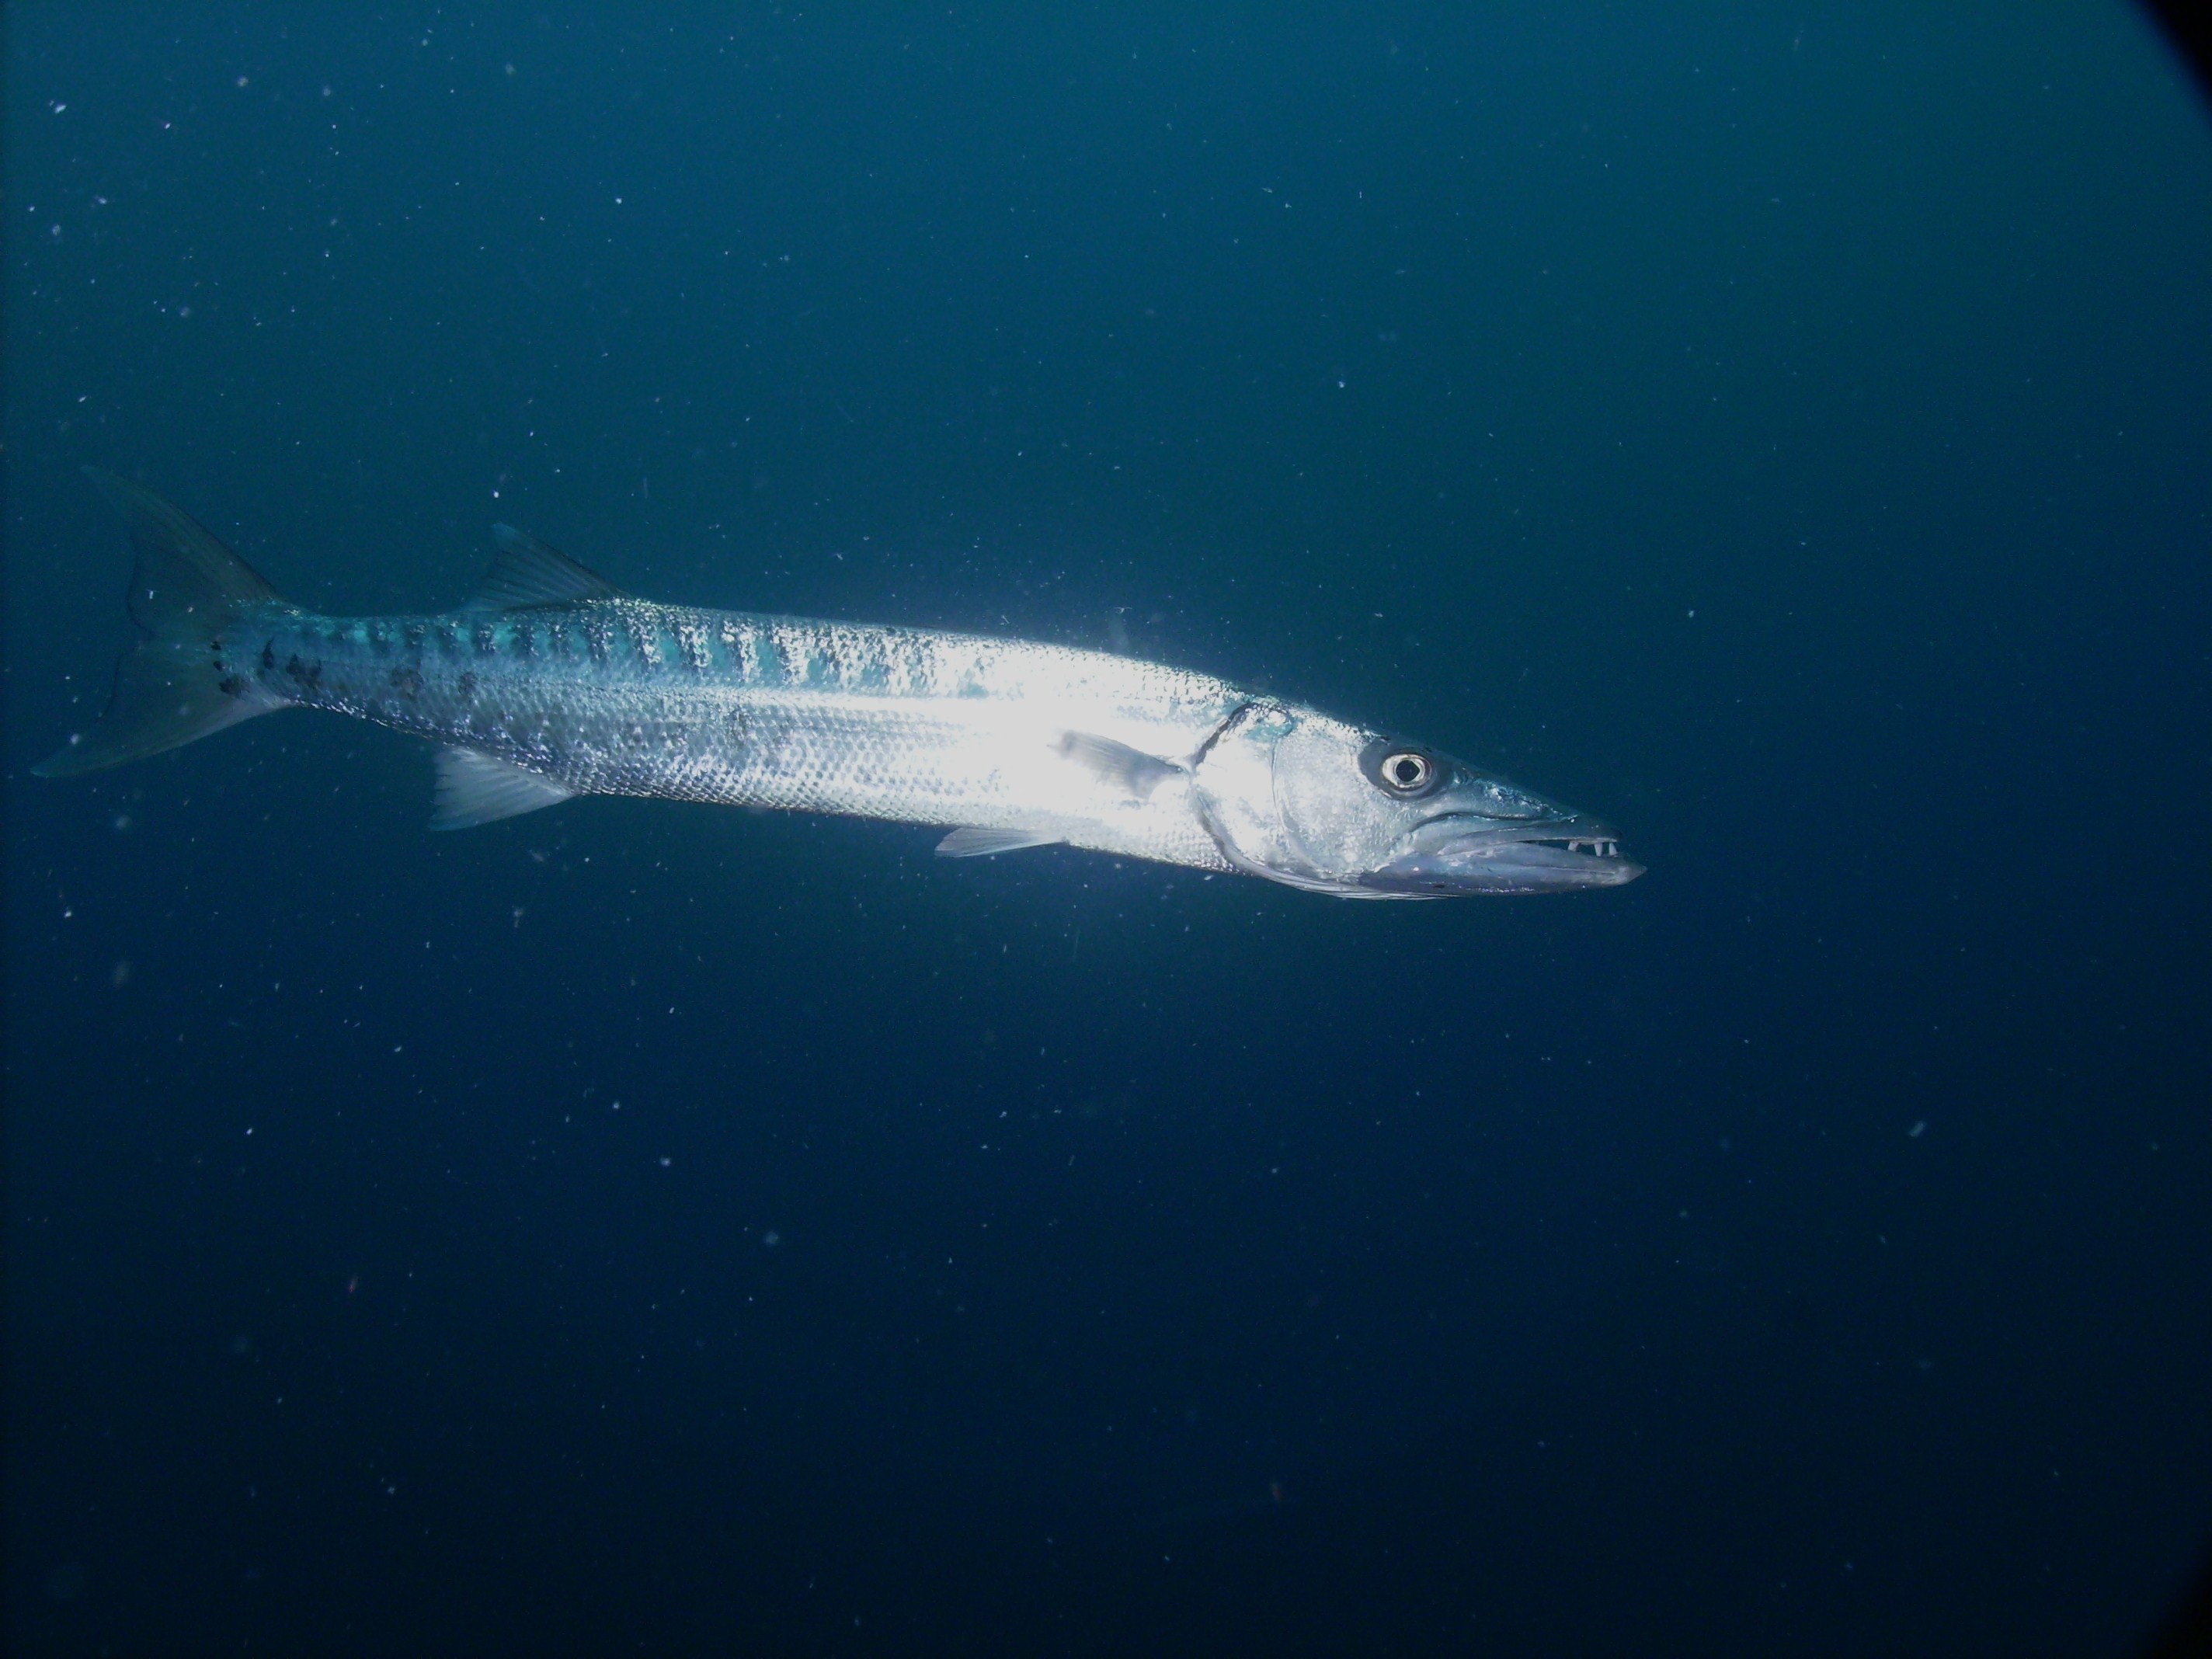 Barracuda at the safety stop on the USS Oriskany